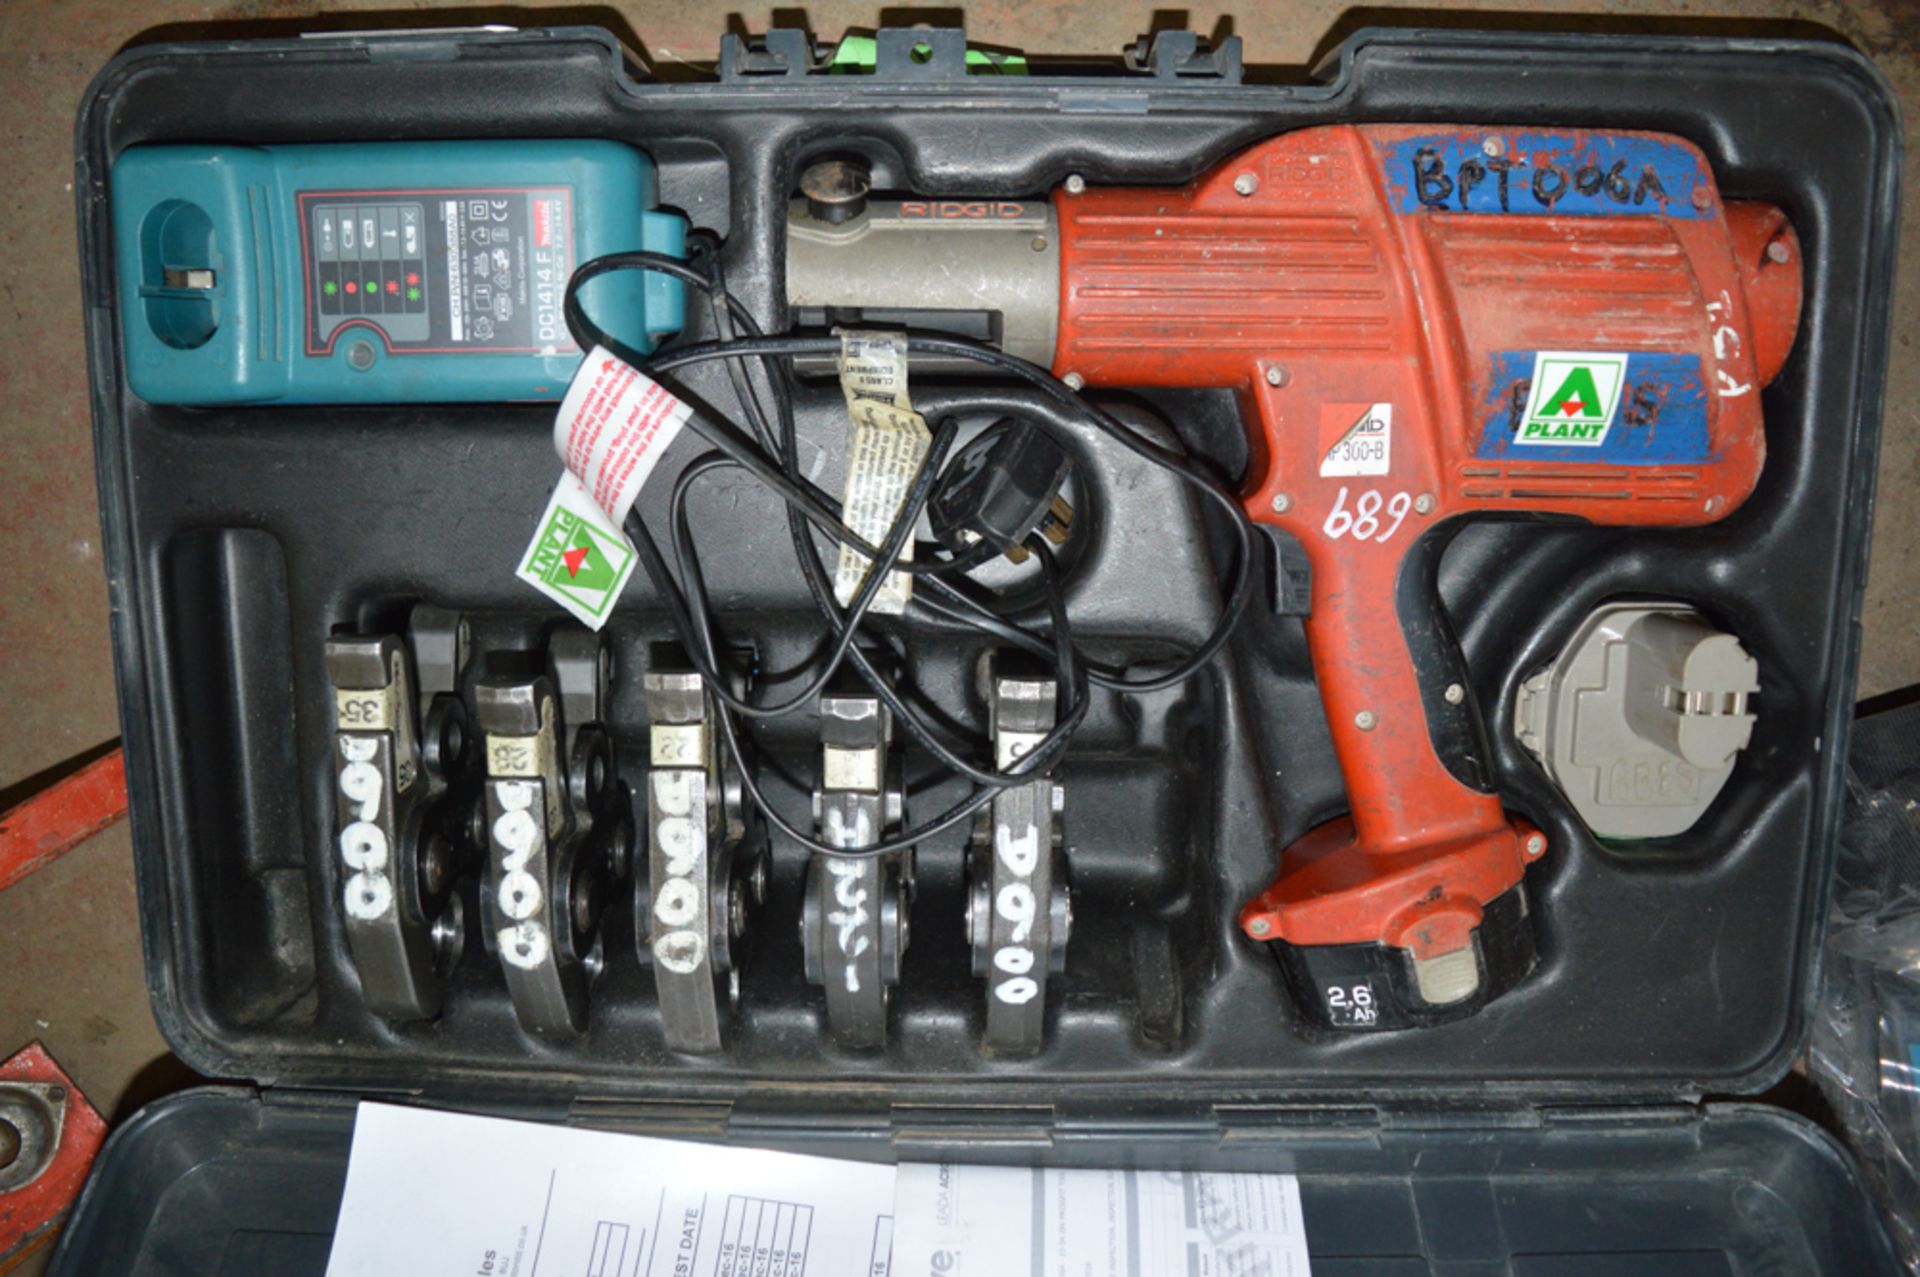 Ridgid 18v cordless crimping tool c/w 2 batteries, charger, 5 jaws & carry case BEBT006A